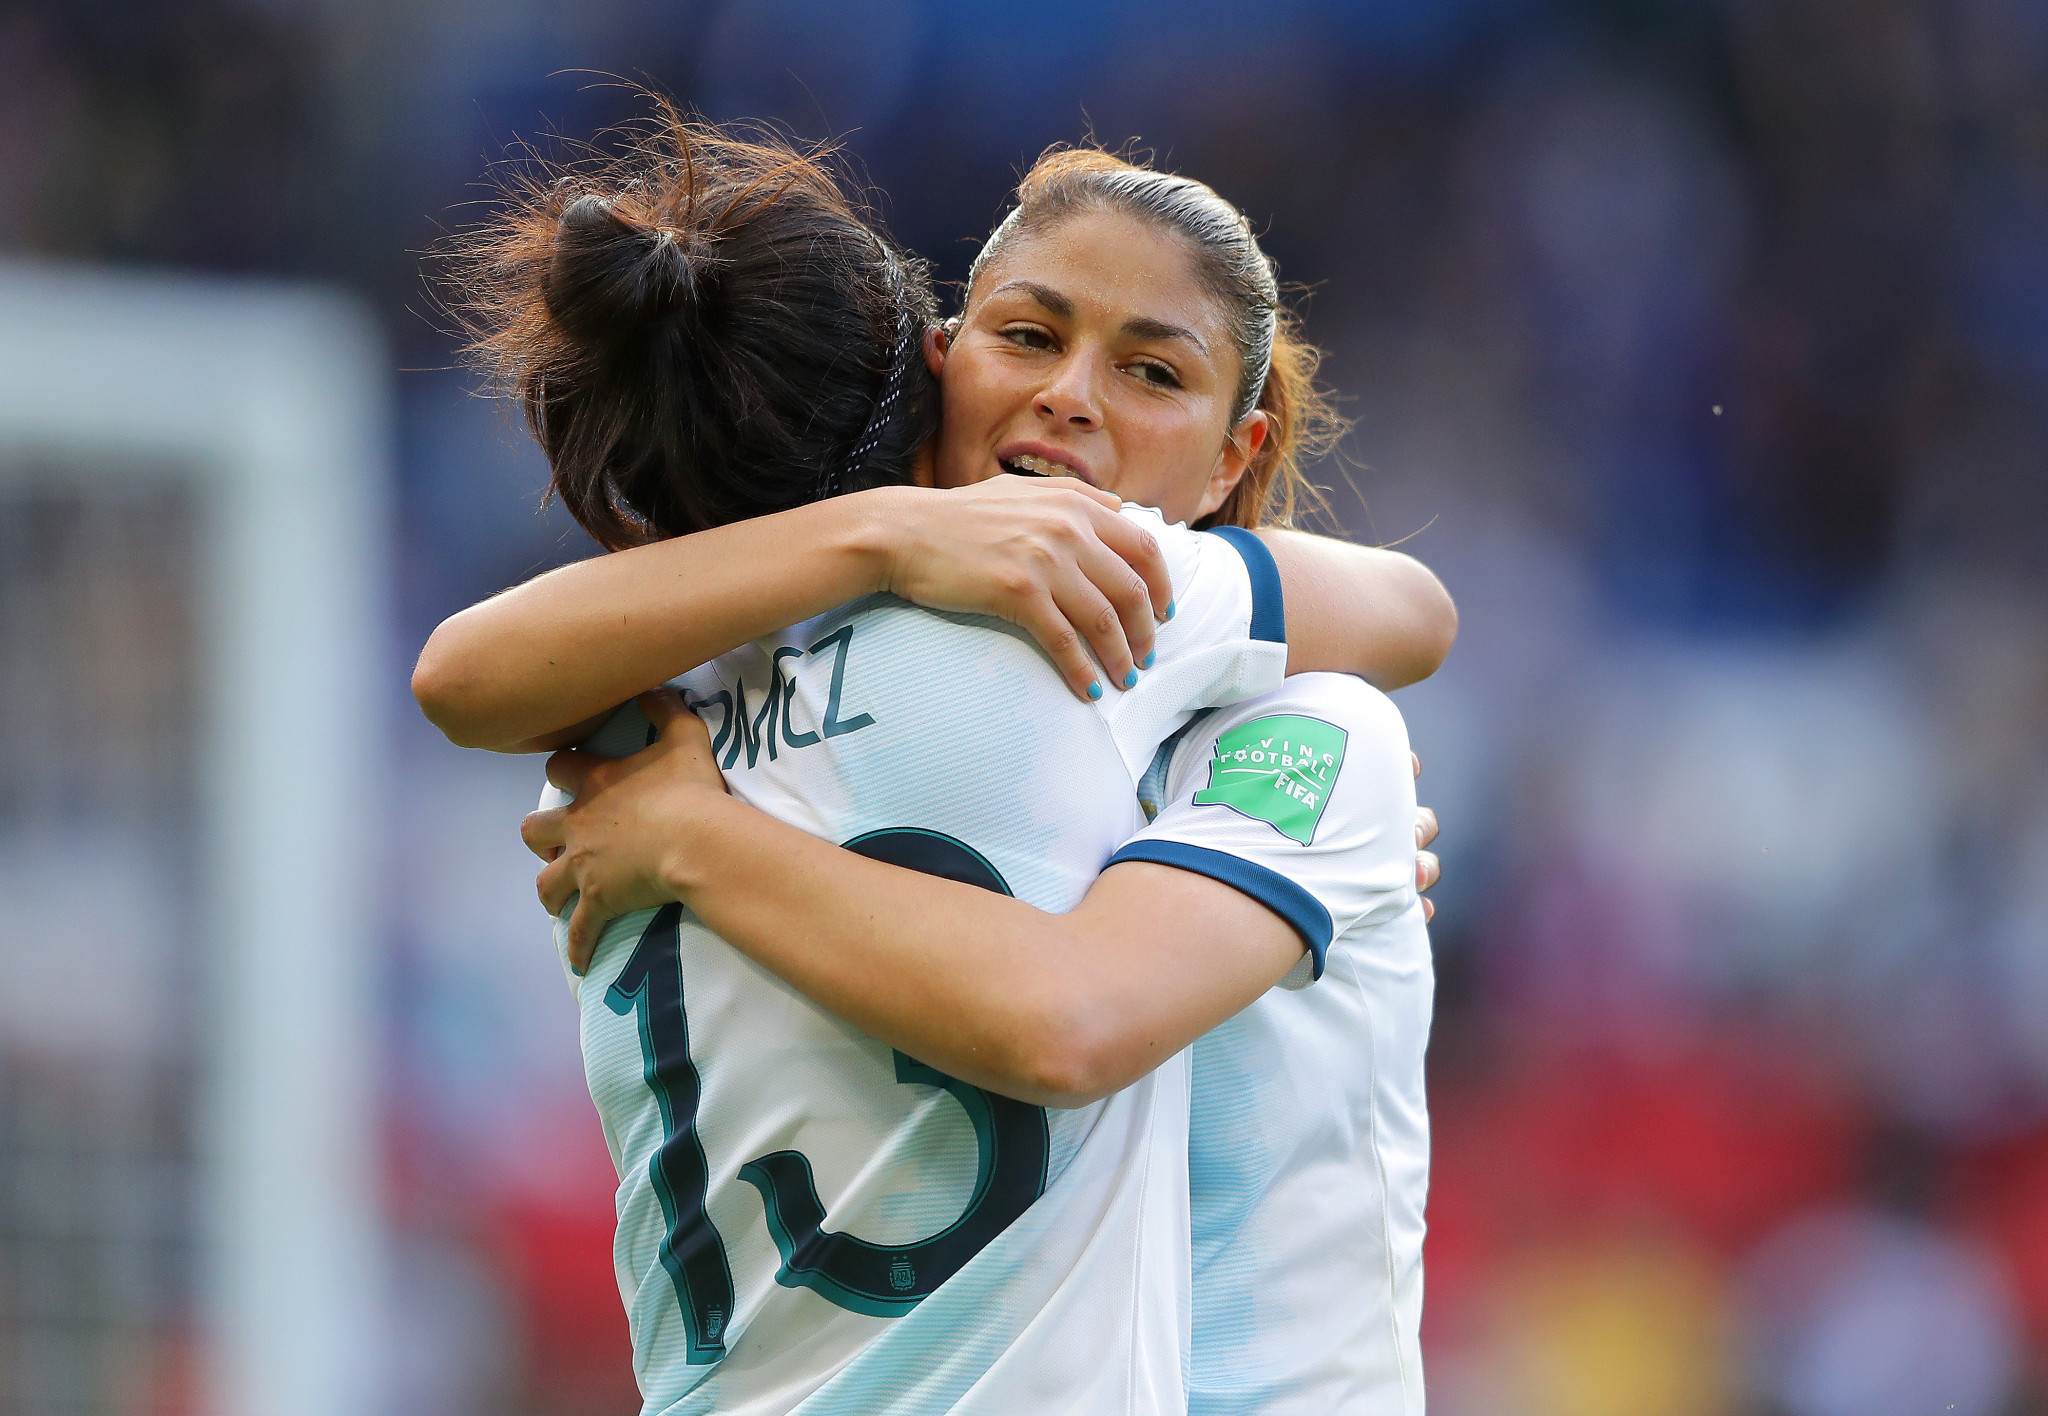 Emotions high as Argentina make FIFA Women's World Cup history at Parc des Princes